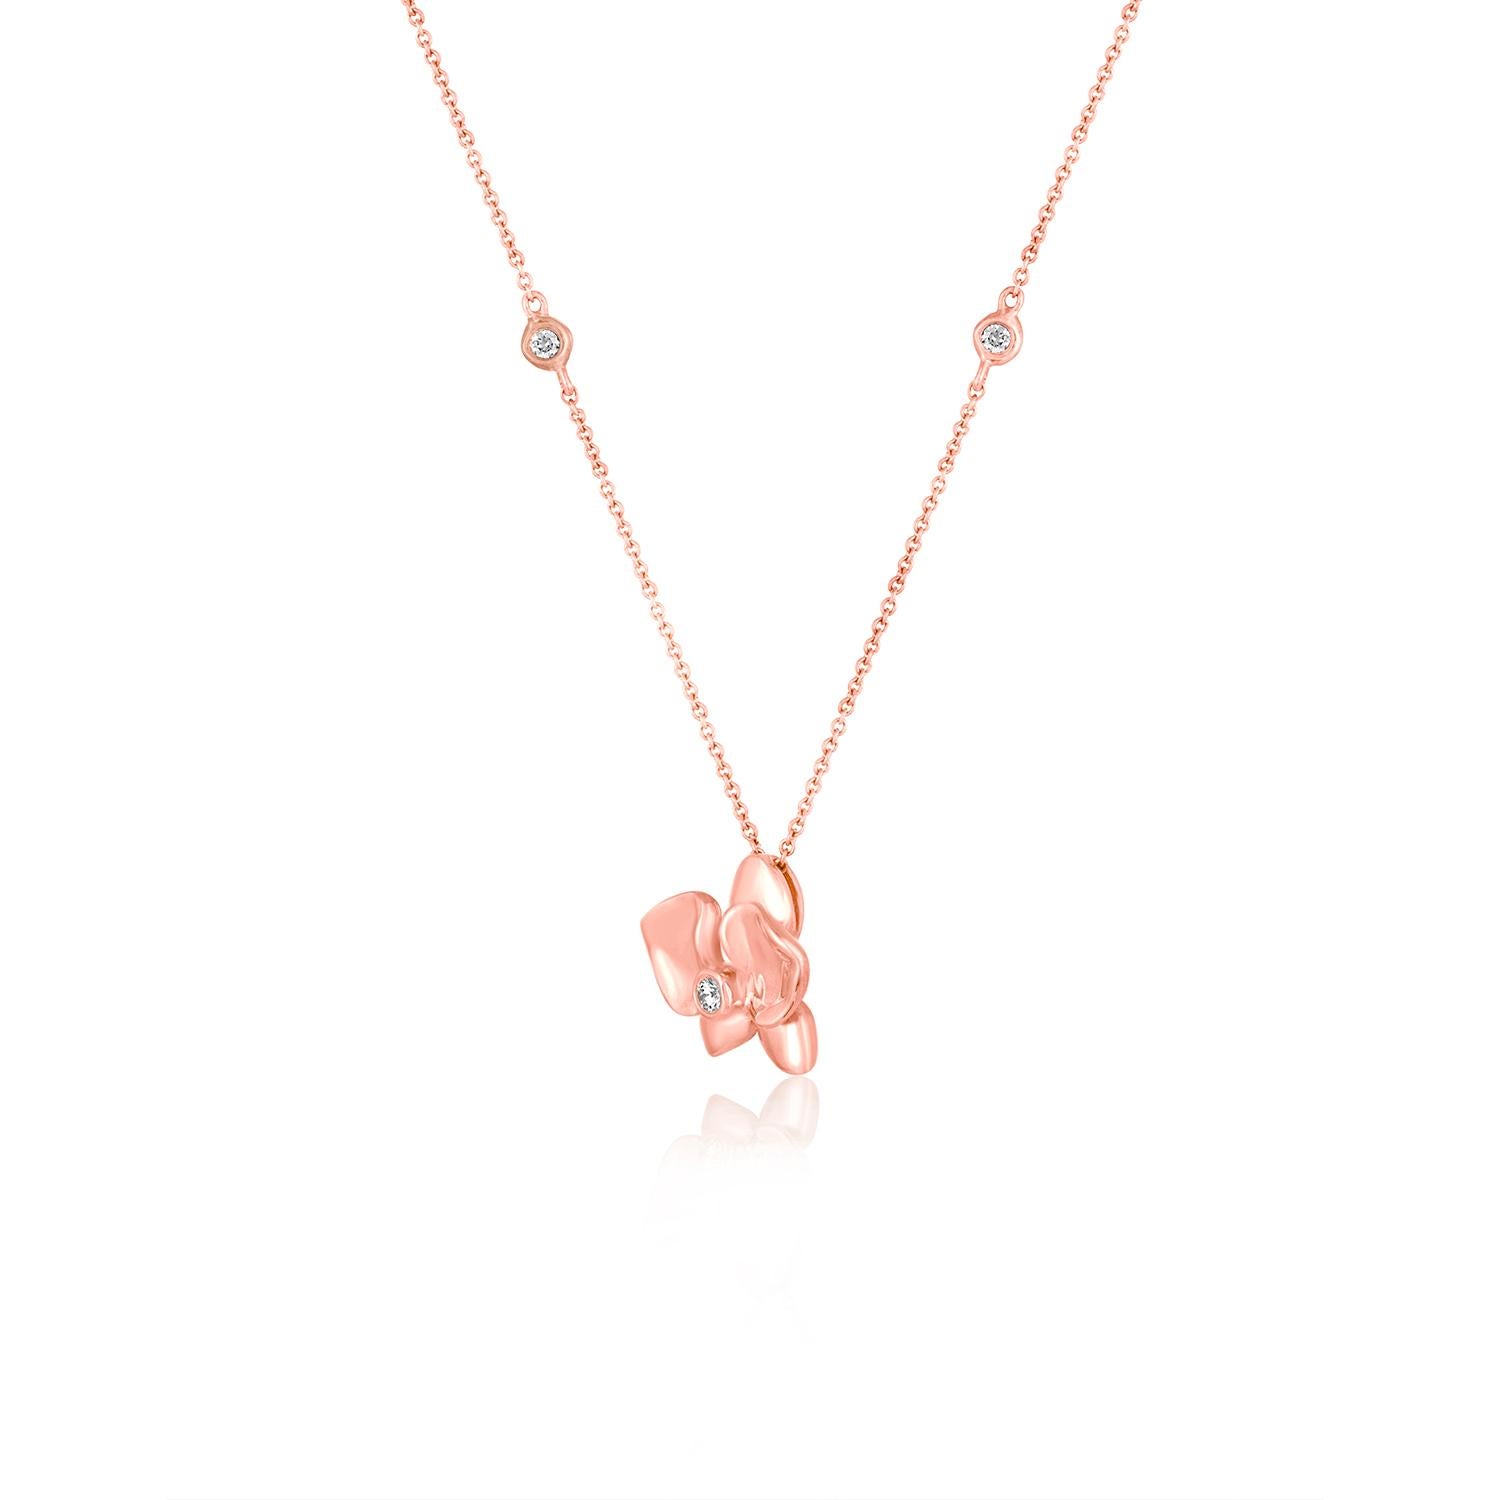 Beautiful Flower Pendant Necklace.
The Chain & Pendant are 18K Rose Gold.
There are 0.06 Carats in Diamonds G SI.
The flower measures 0.50